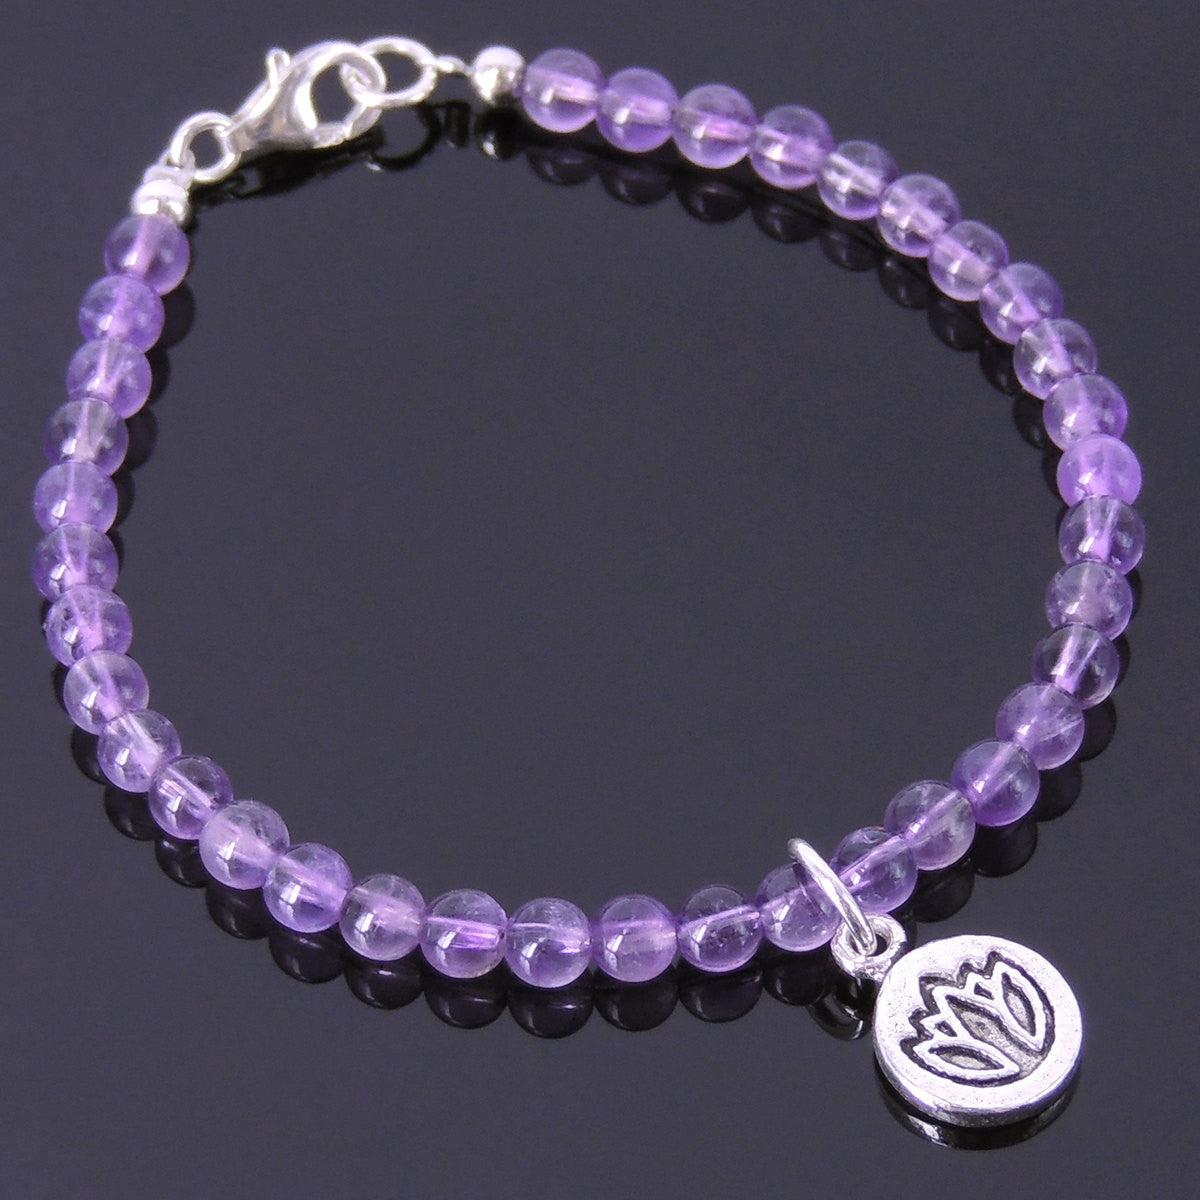 4mm Amethyst Healing Gemstone Anklet with S925 Sterling Silver Spacers Lotus Pendant & Clasp - Handmade by Gem & Silver AN011